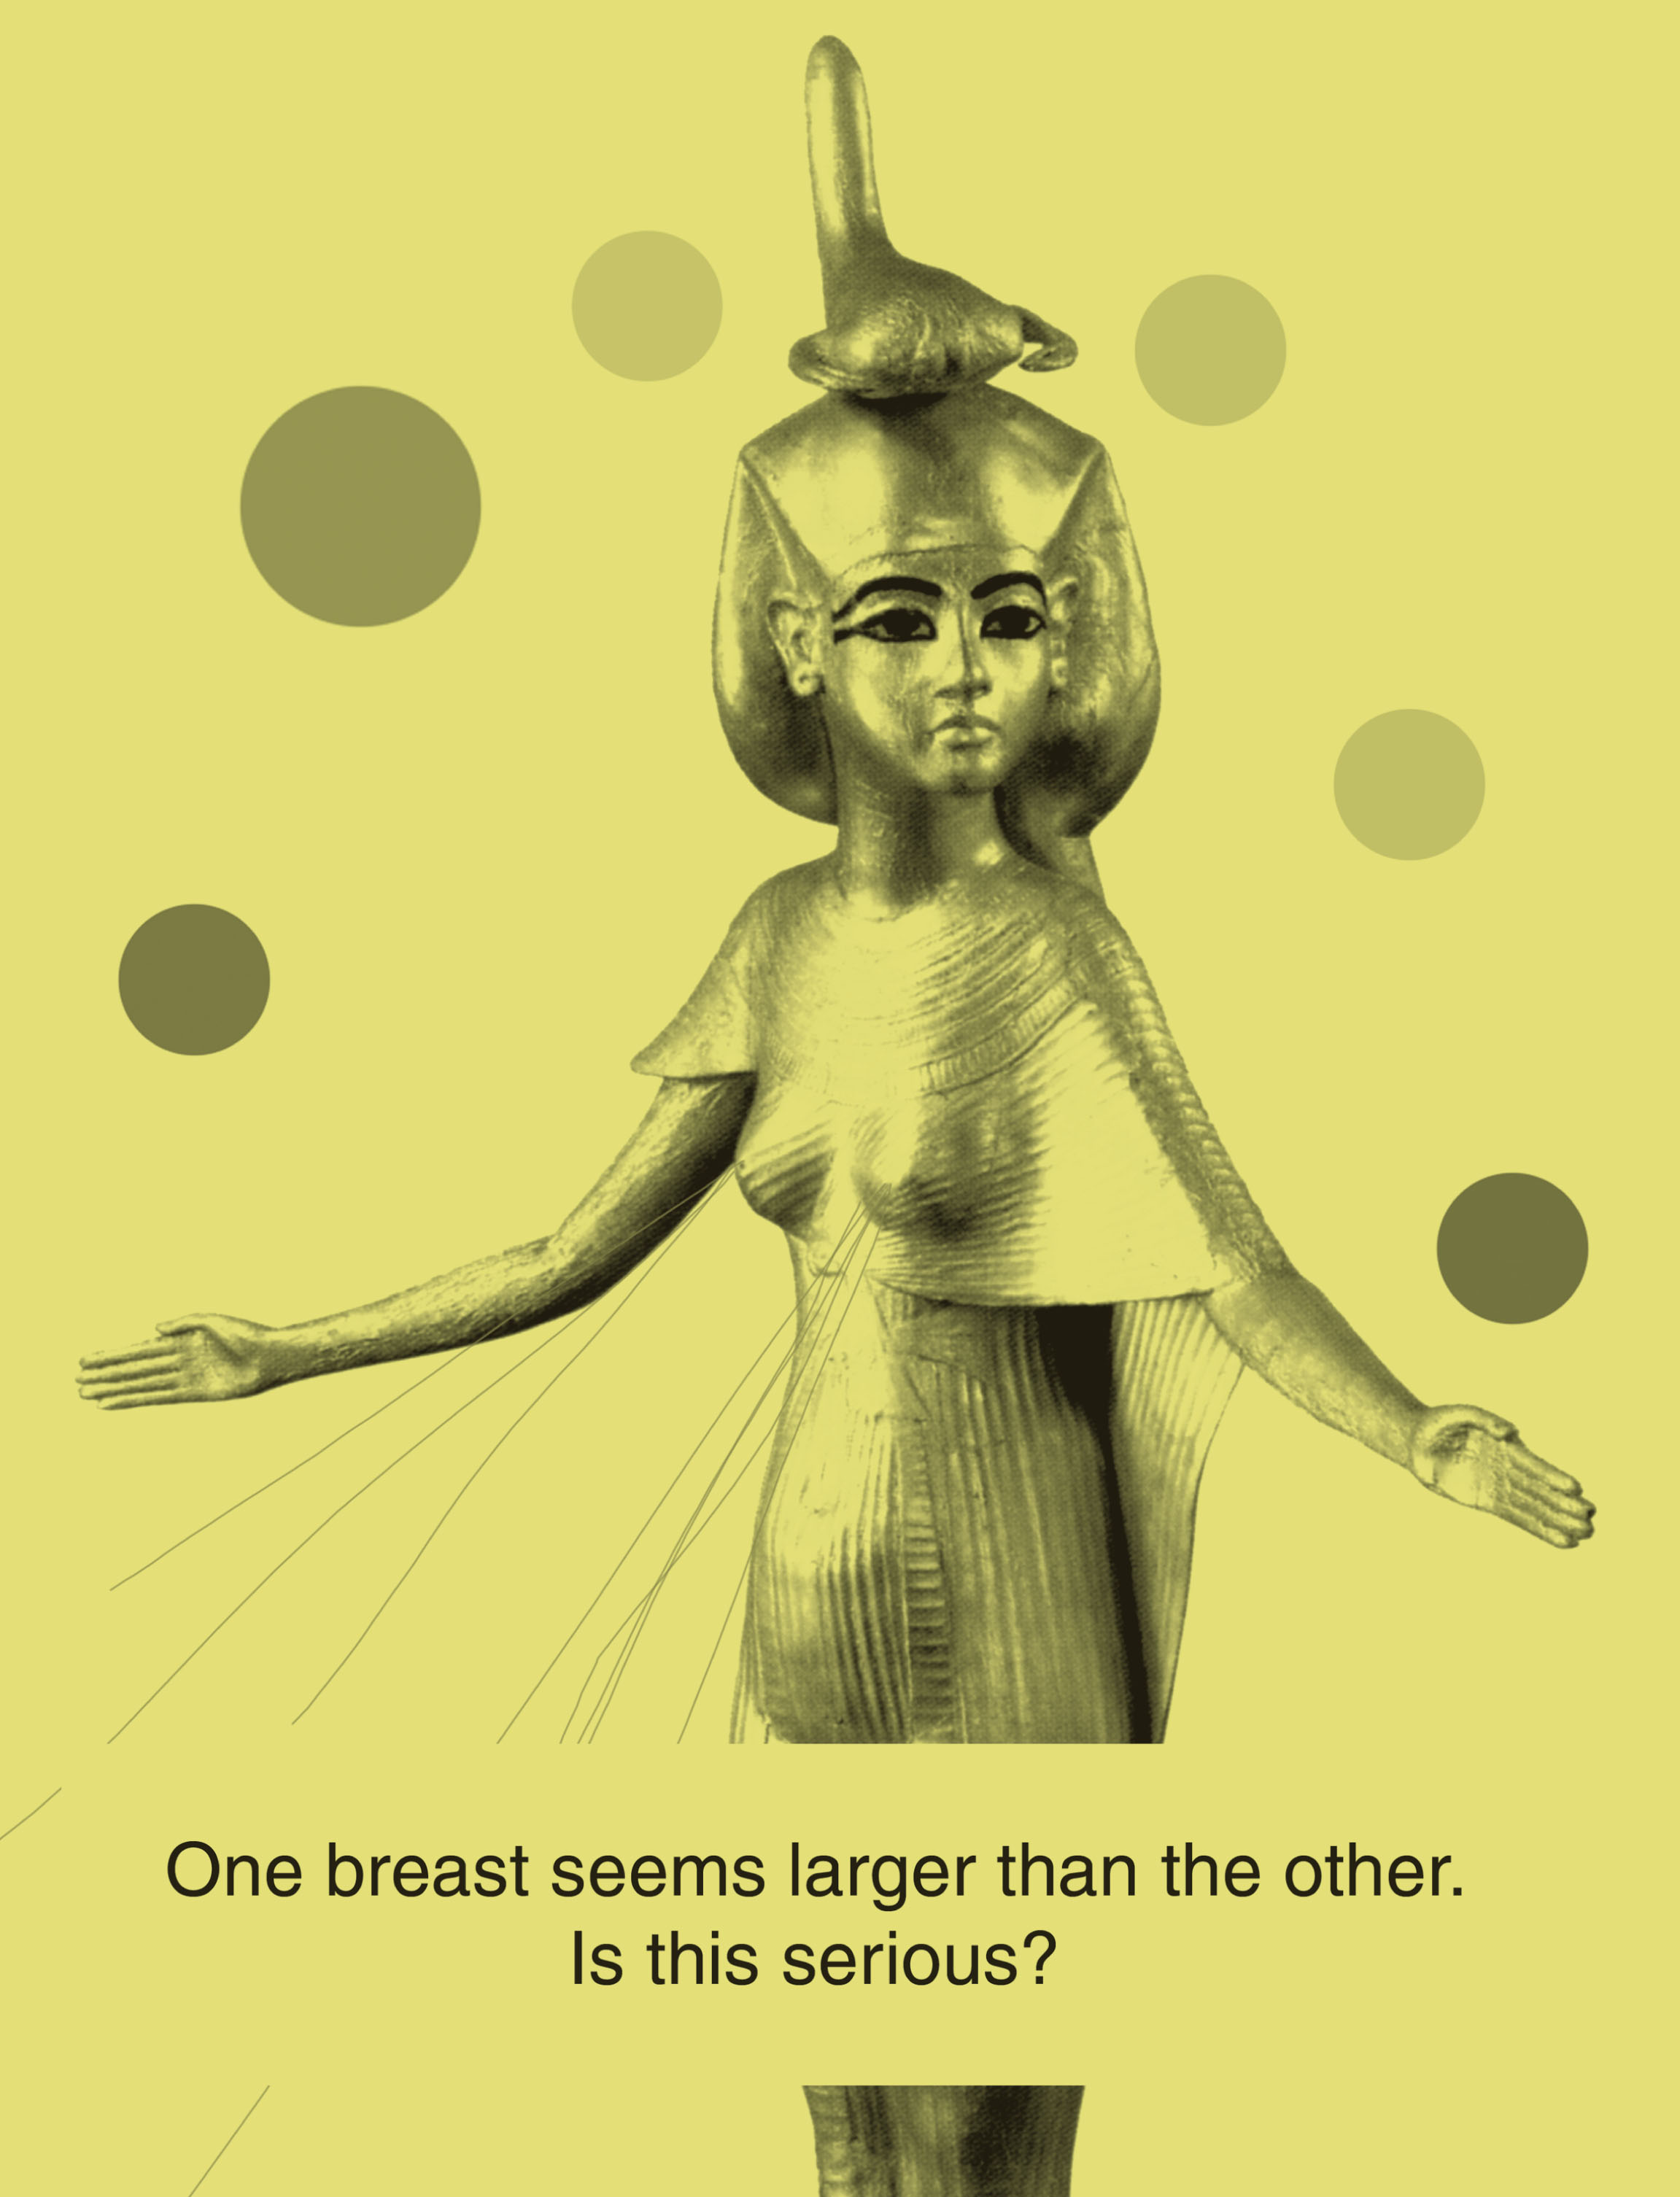 edcat – One breast seems larger than the other